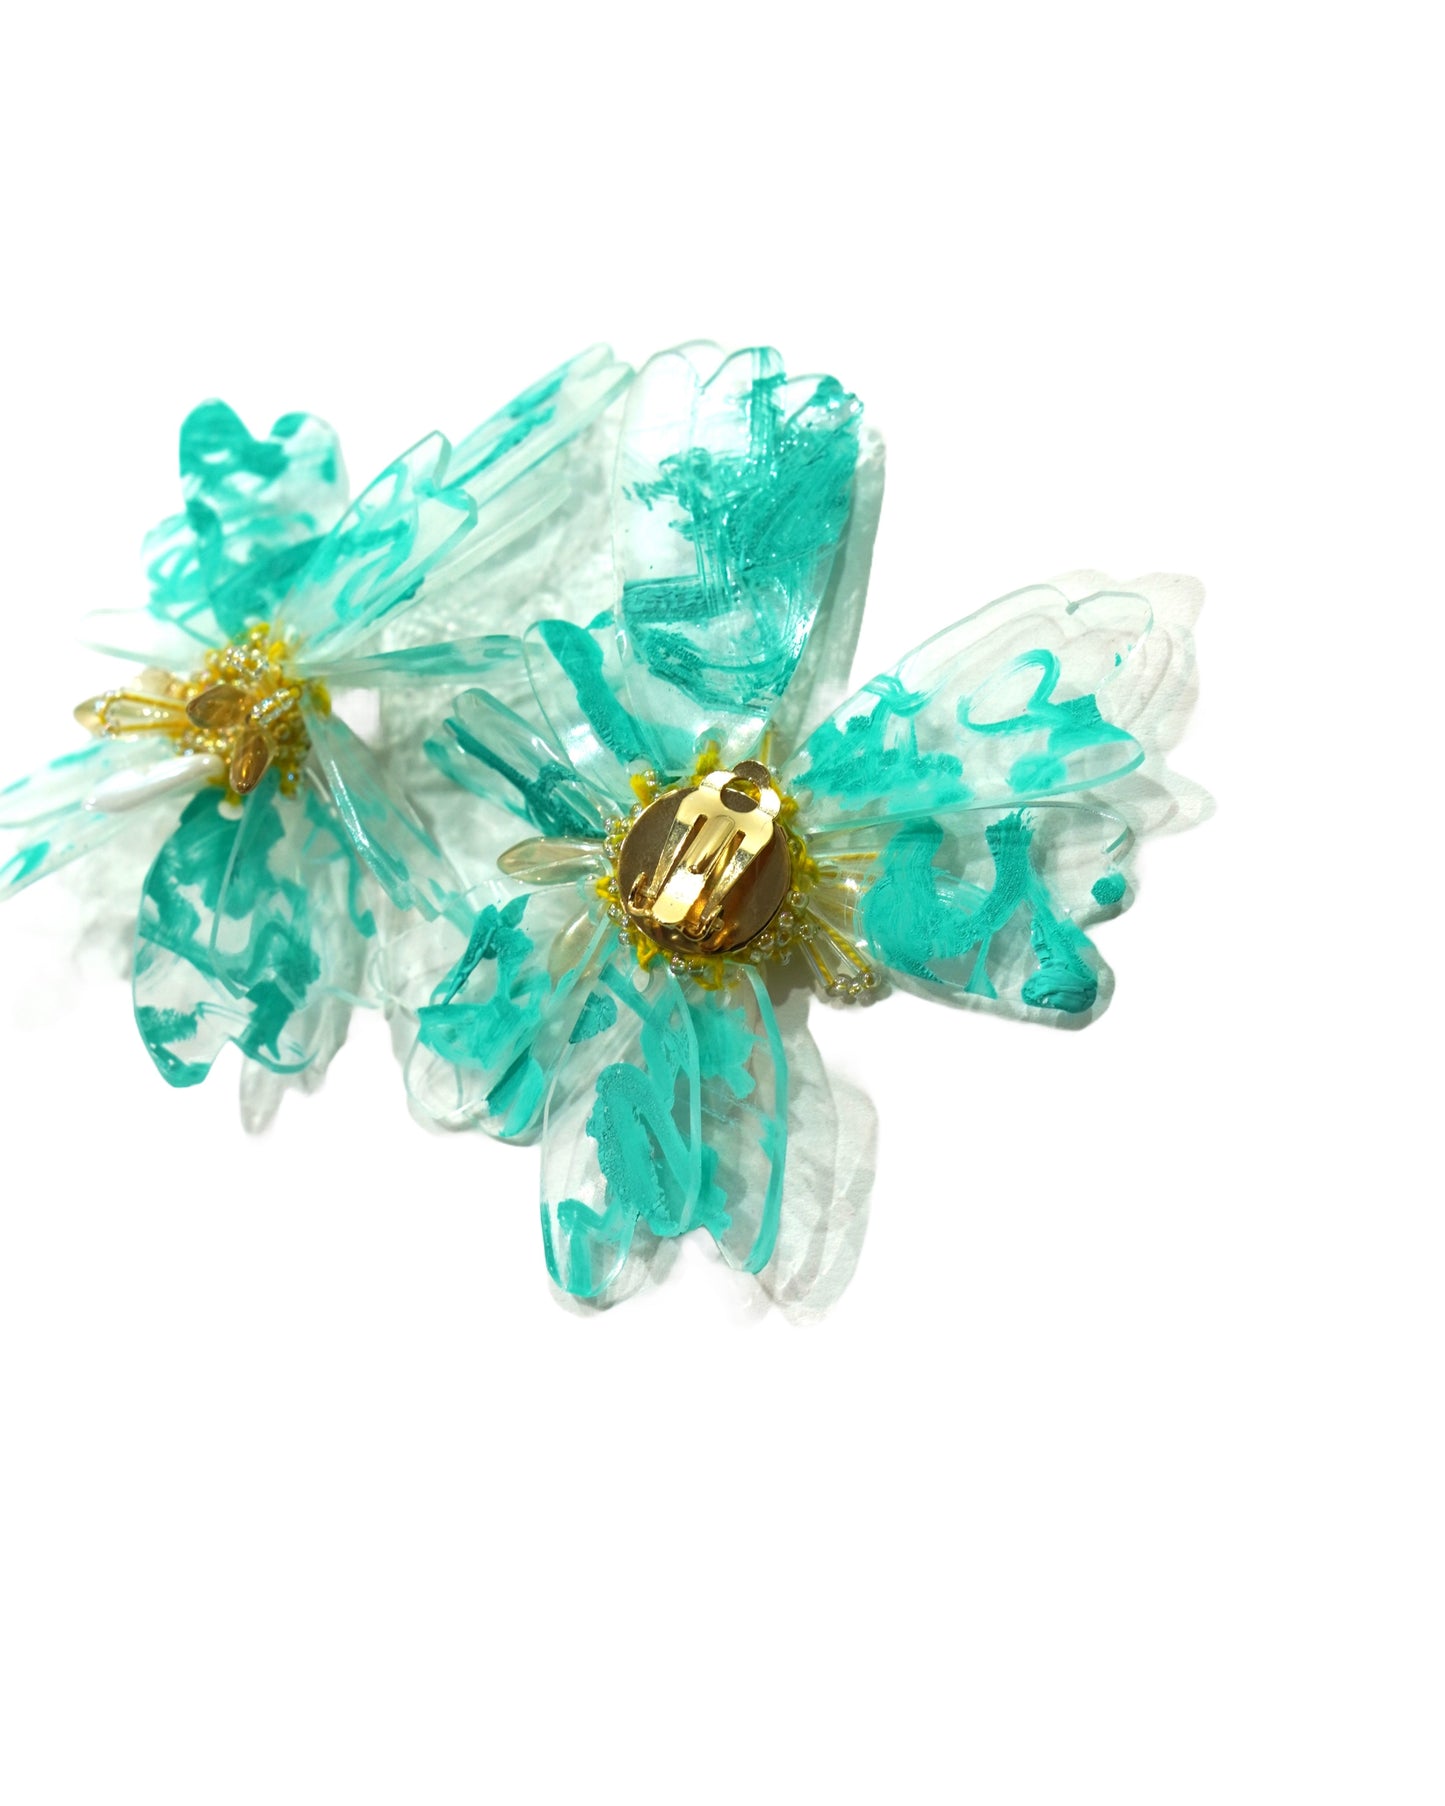 NON TOKYO / CLEAR FLOWER EARRING (BLUE) / 〈ノントーキョー〉クリアフラワーイヤリング (ブルー)